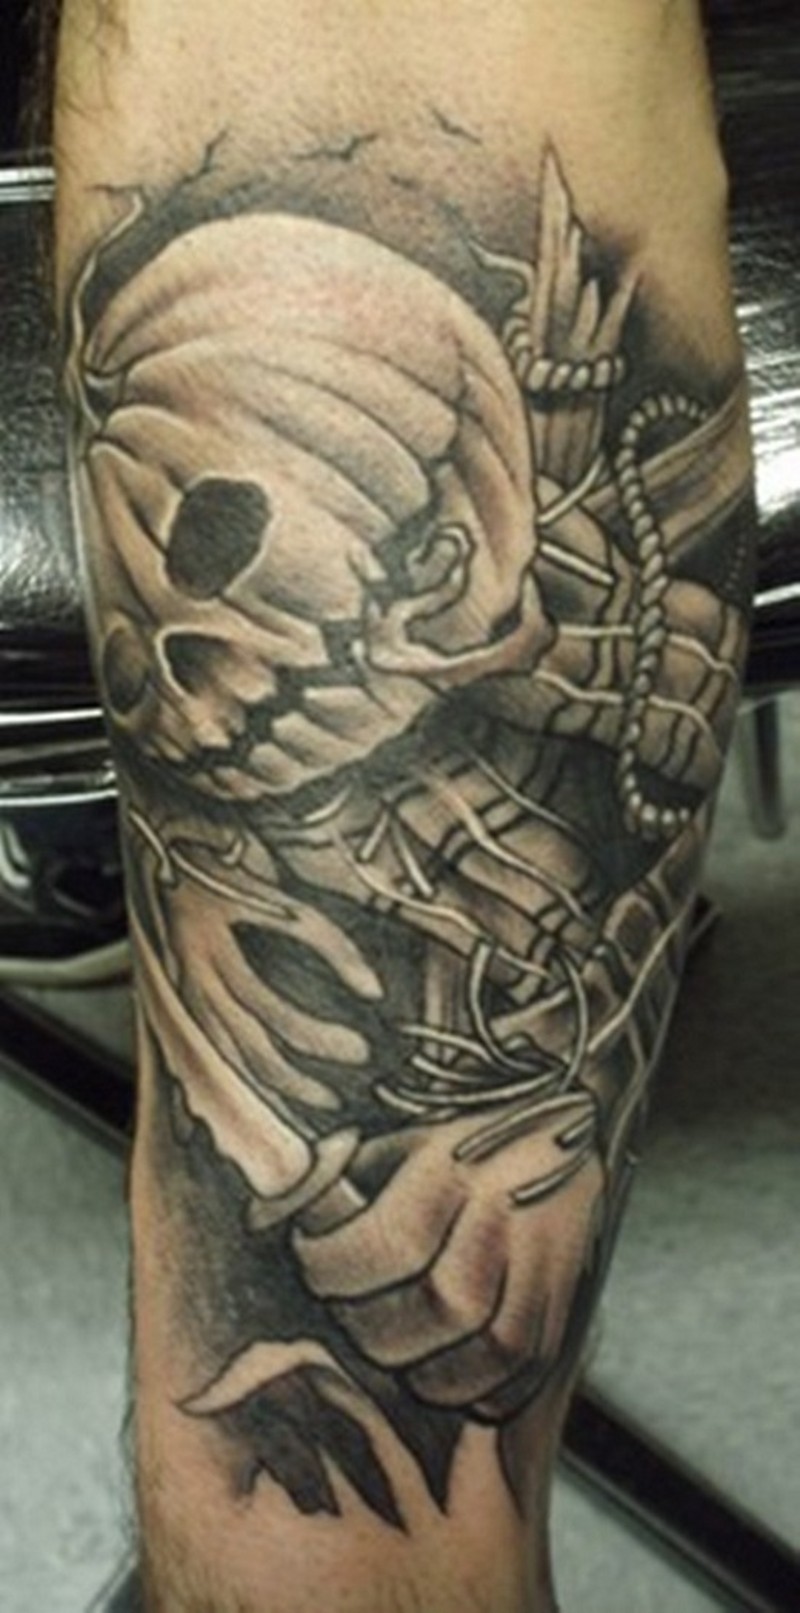 Cool looking colored forearm tattoo of cartoon like pumpkin monster with knife